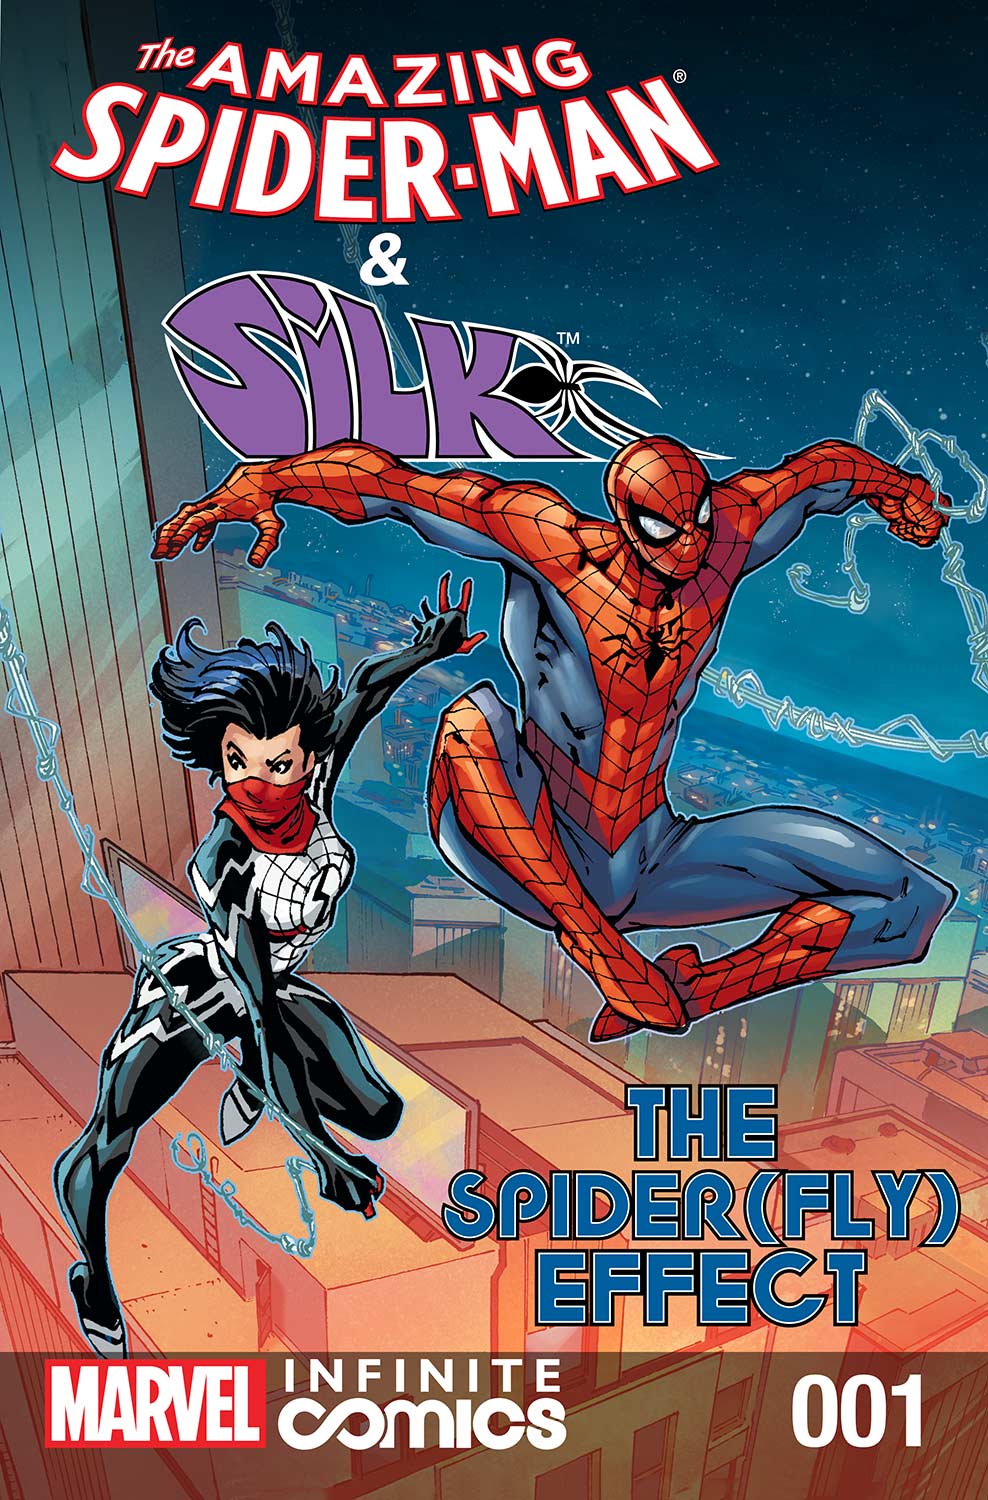 Amazing Spider-Man & Silk: The Spider(Fly) Effect Infinite Comic (2016) #1